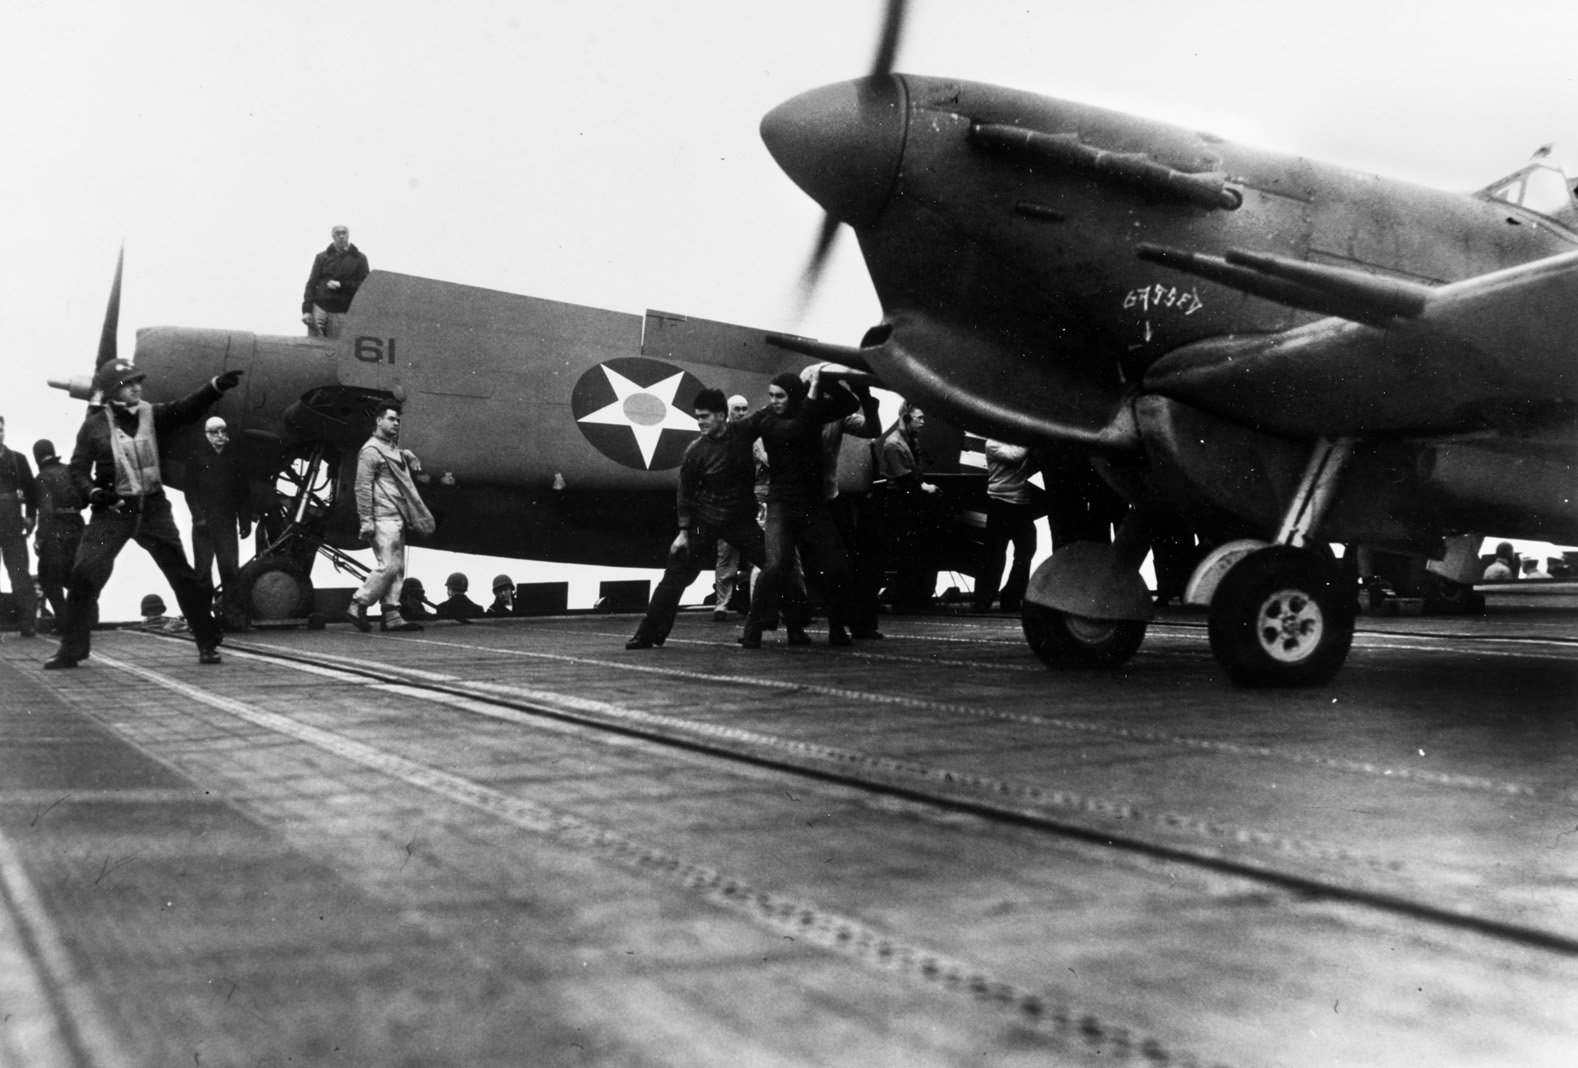 The U.S. aircraft carrier Wasp brought 47 Spitfires to Malta on May 9, 1942, where they were used to counterstrike German and Italian ships and aircraft. Here a Spitfire, with a Grumman F4F Wildcat in the background, prepares to launch.